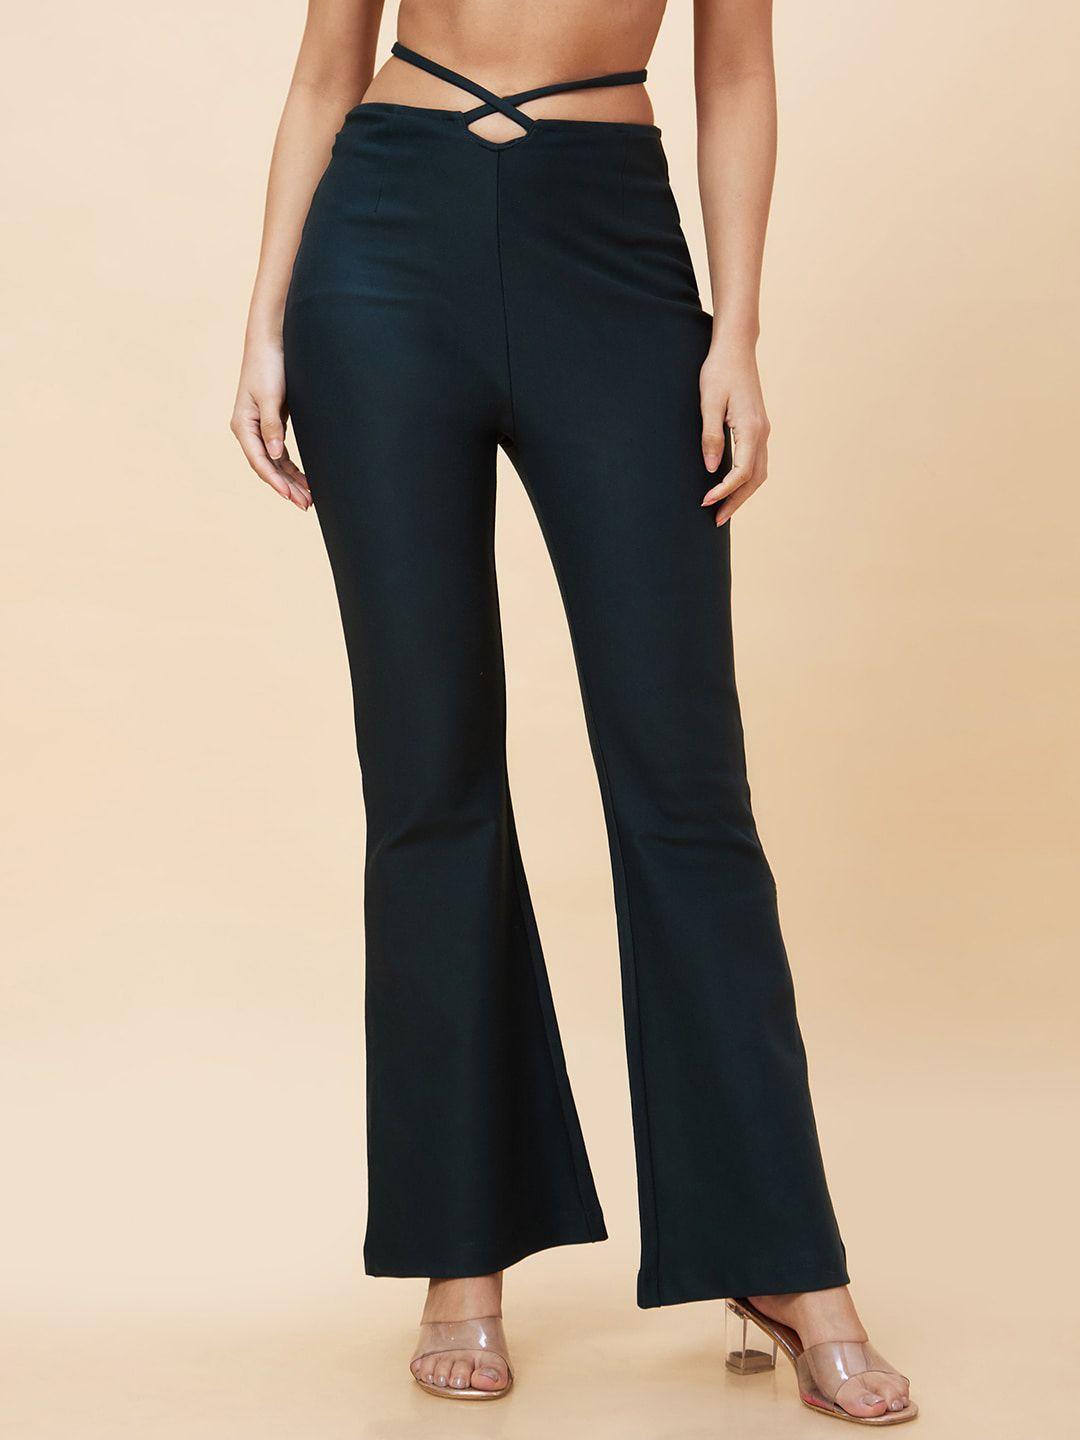 globus-women-mid-rise-bootcut-trousers